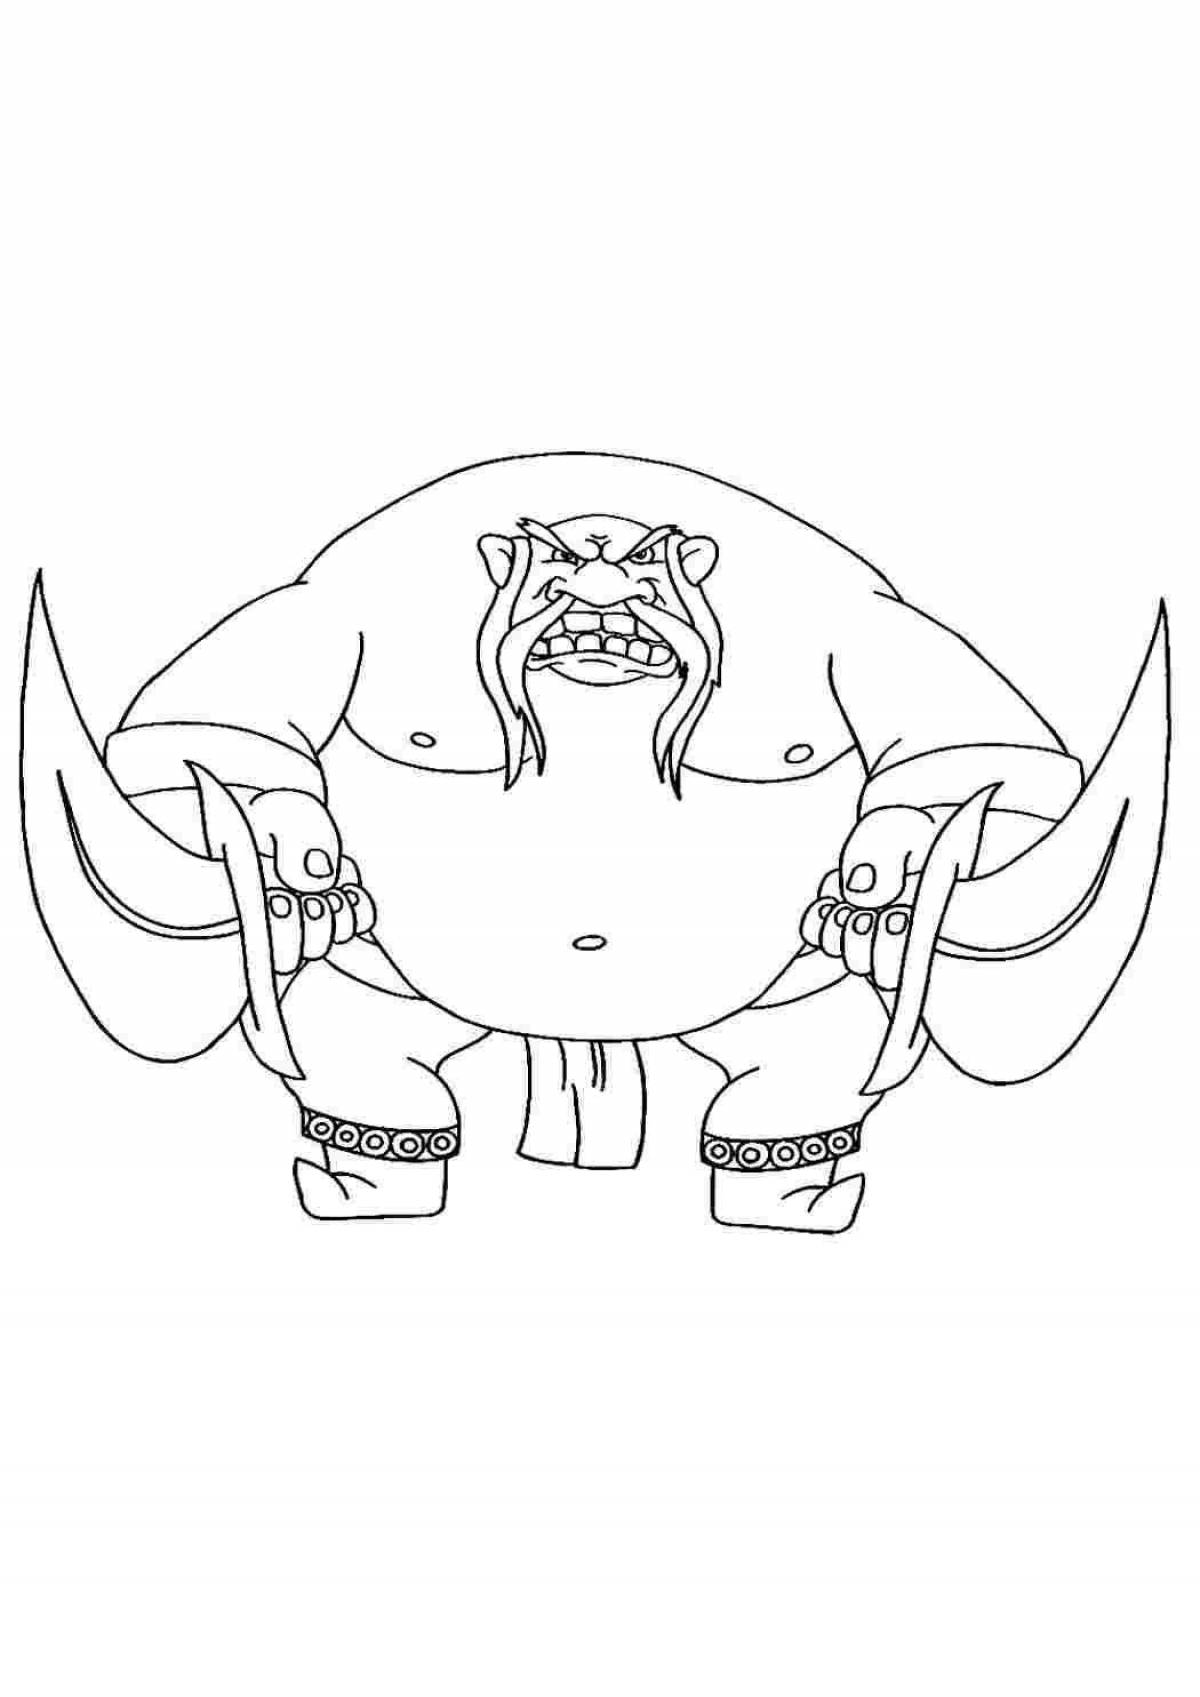 Bright coloring page 3 heroes of the game